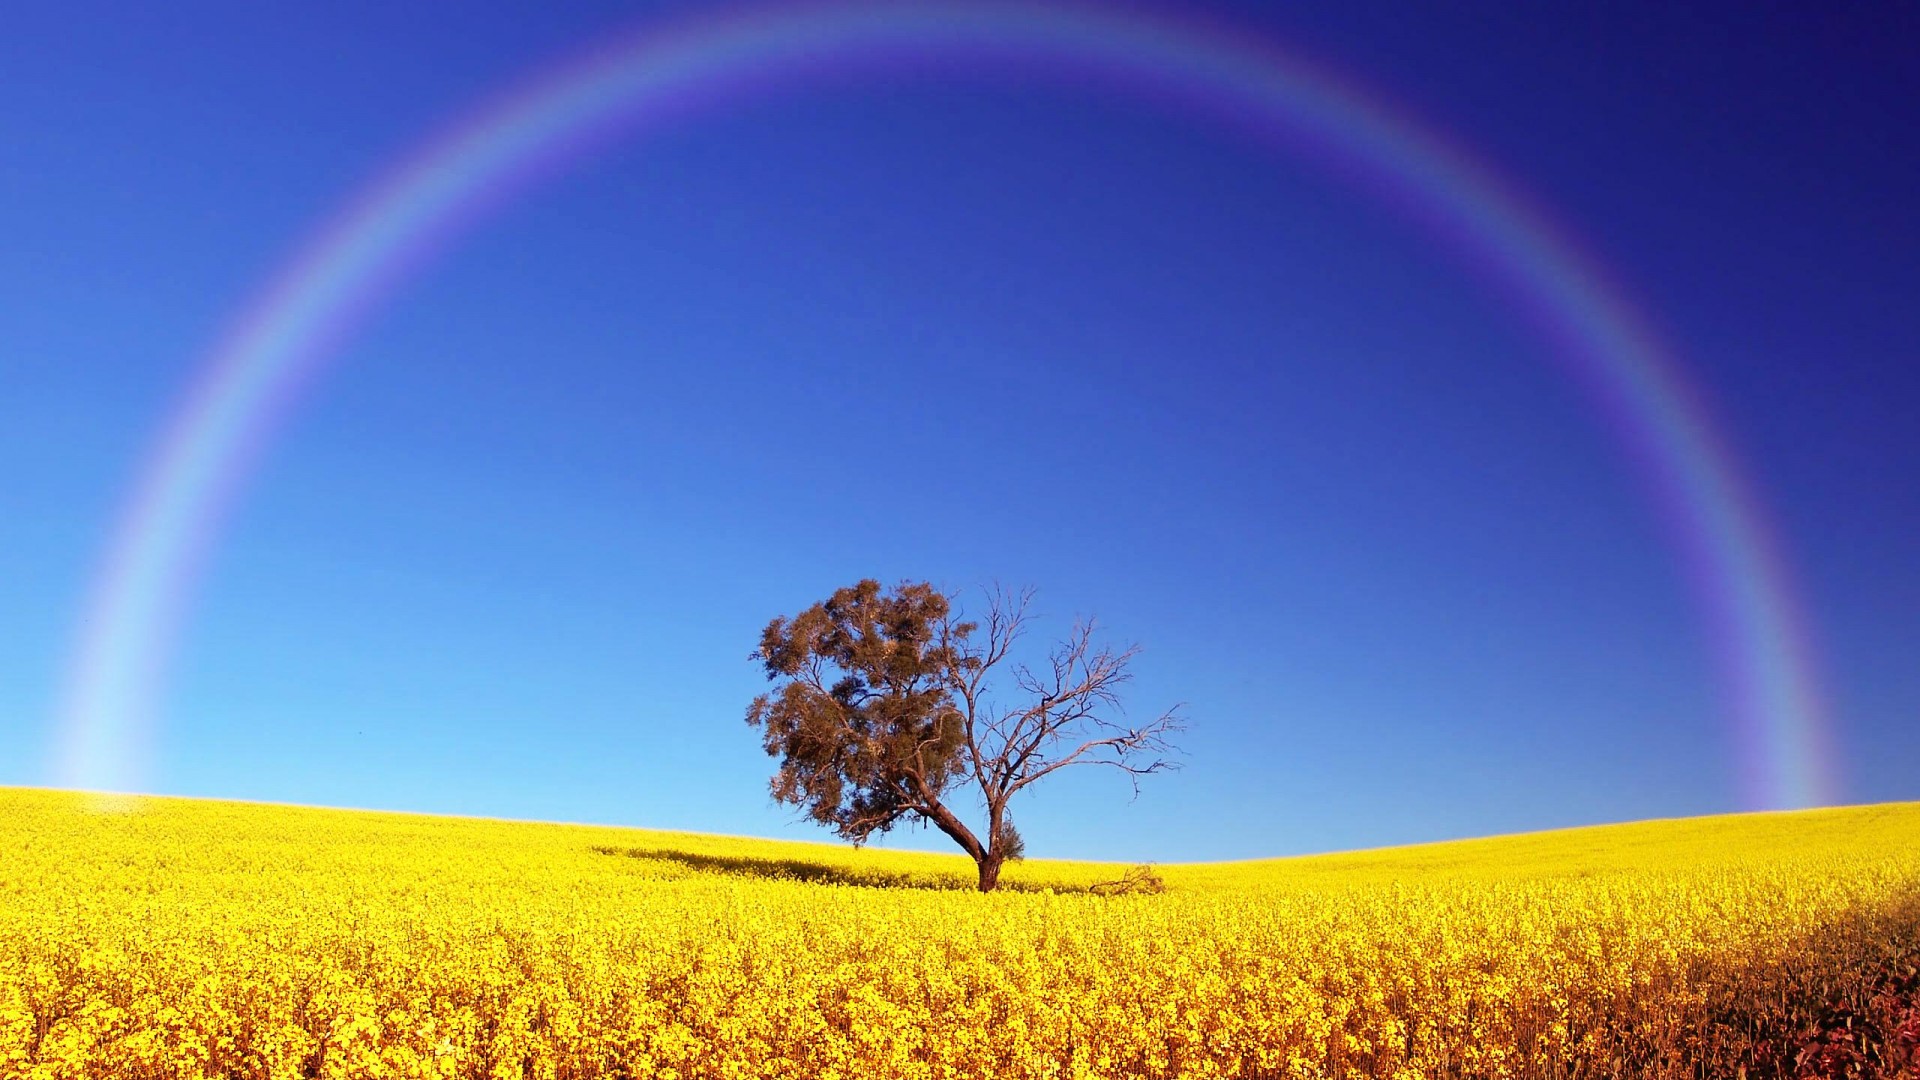 Rainbow HD Wallpaper Pictures Image Background Photos